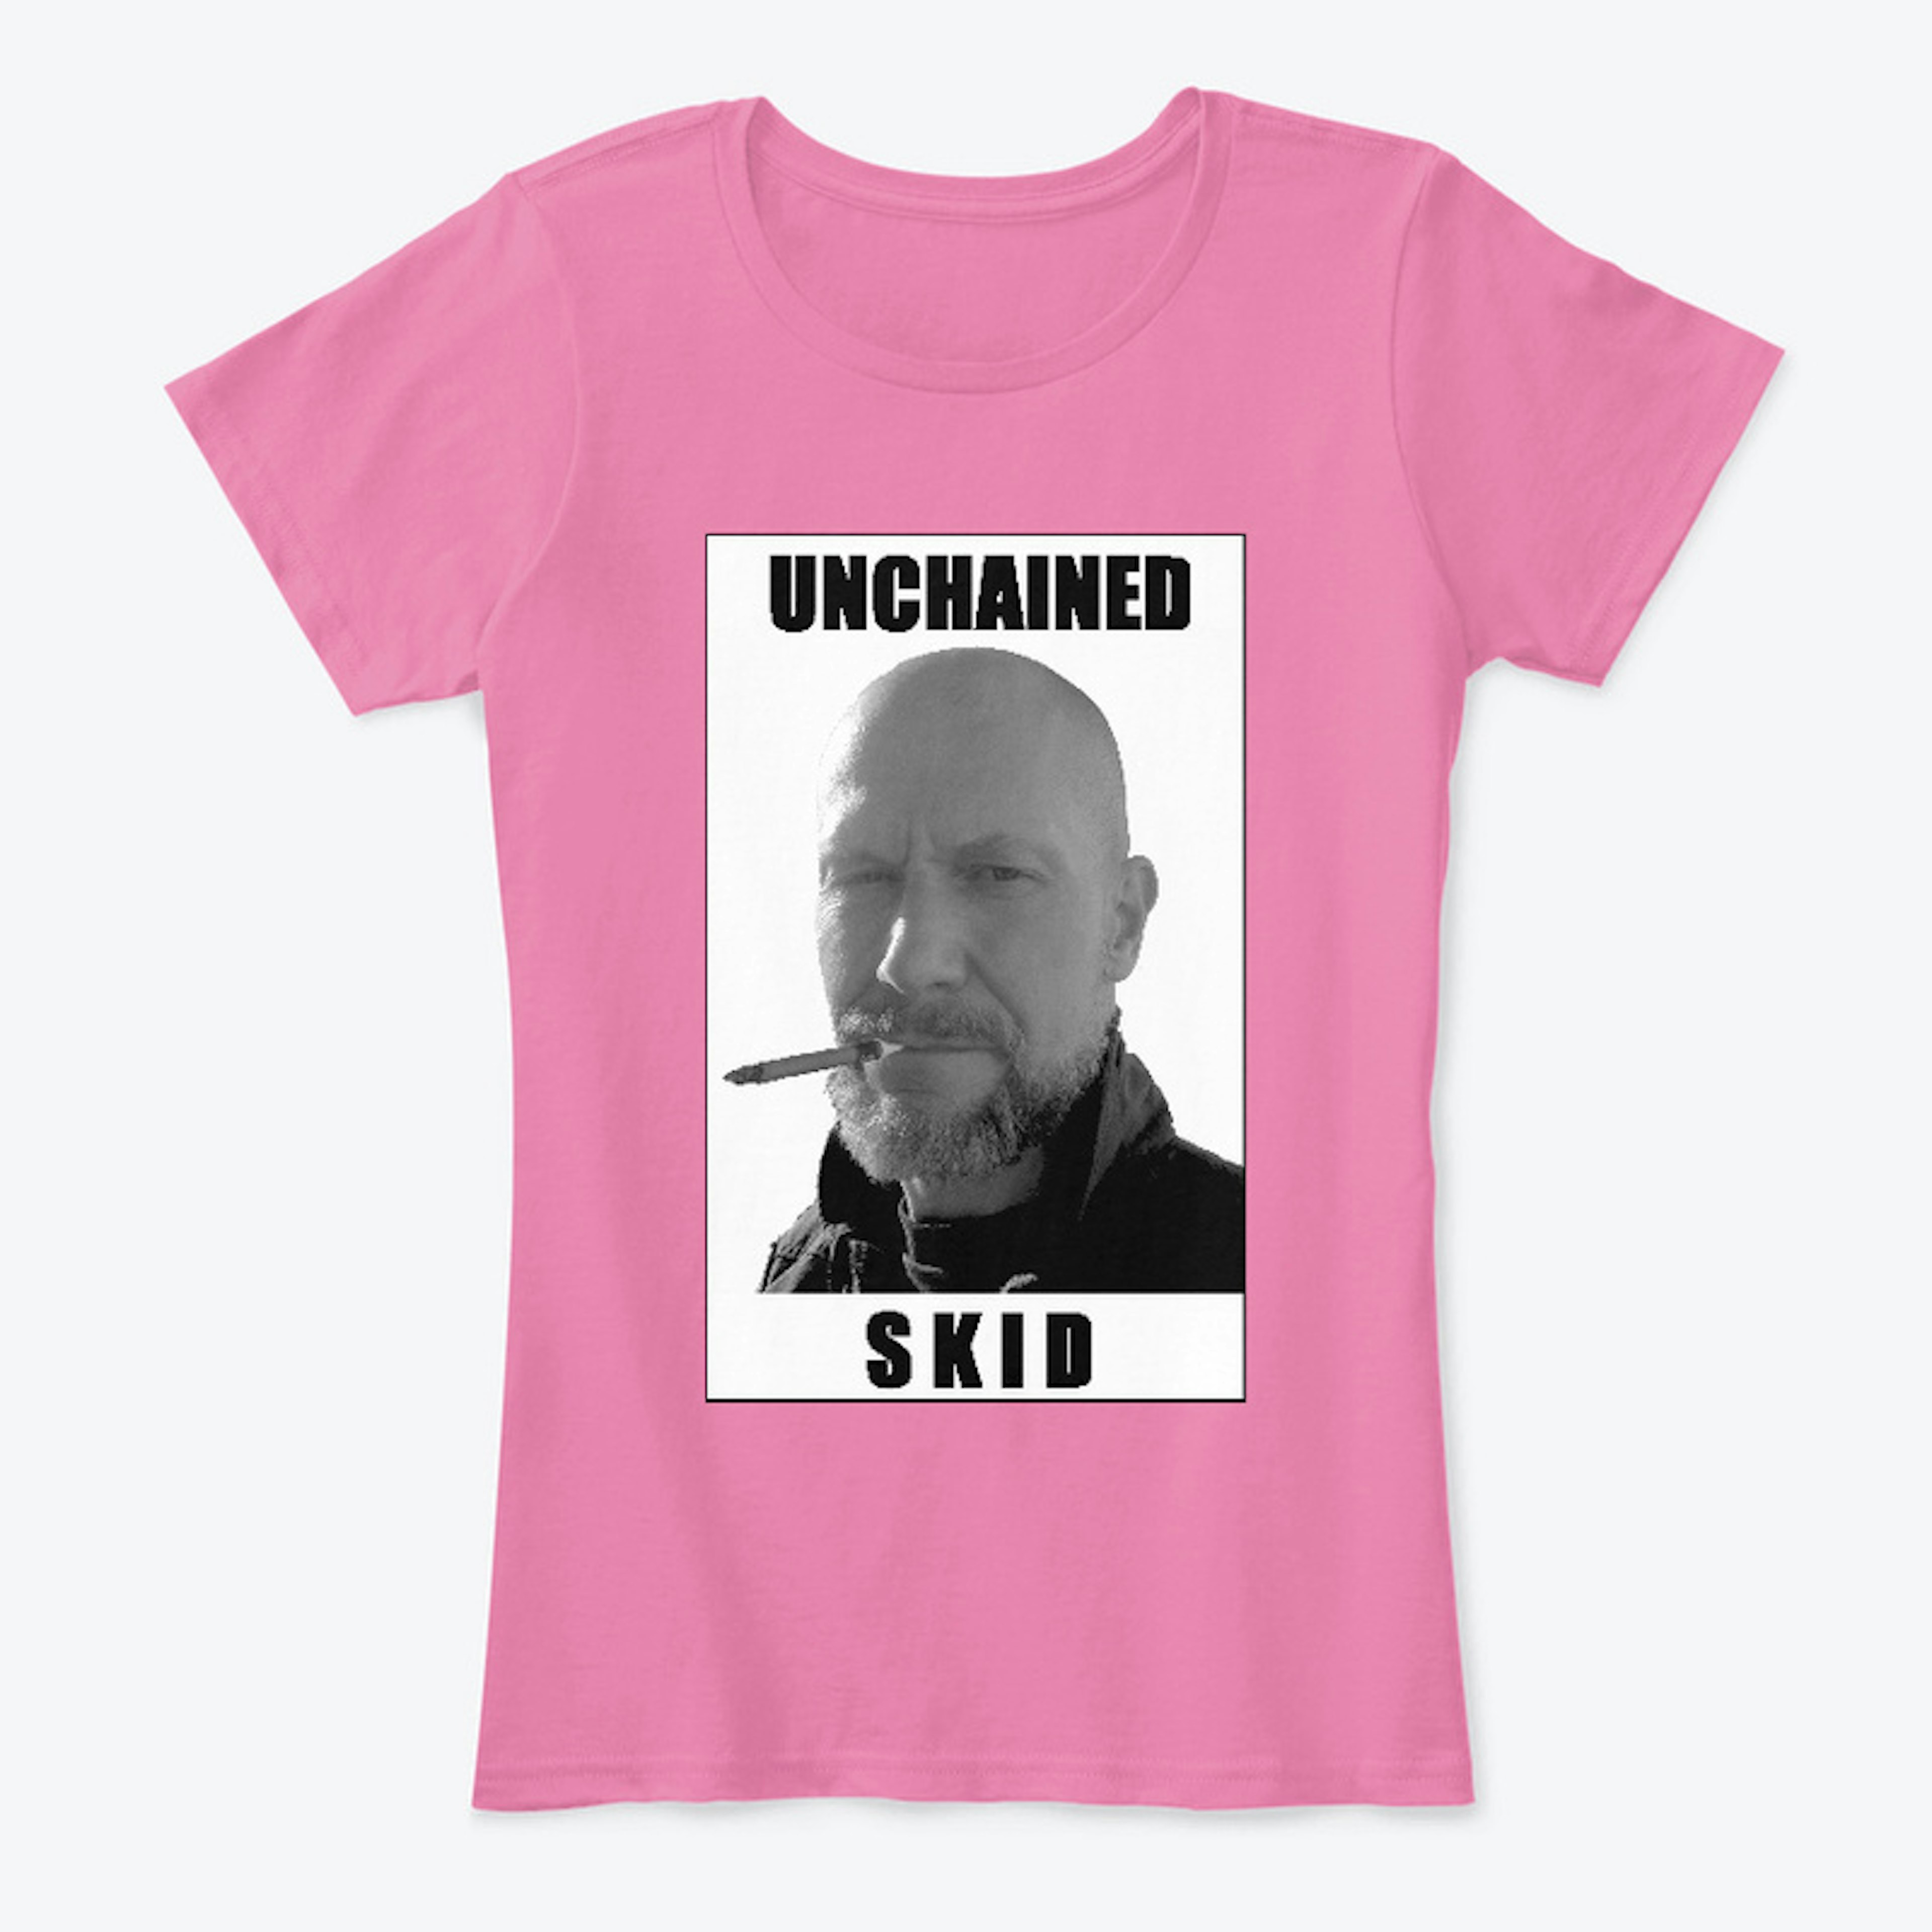 Unchained Skid - For the Ladies!